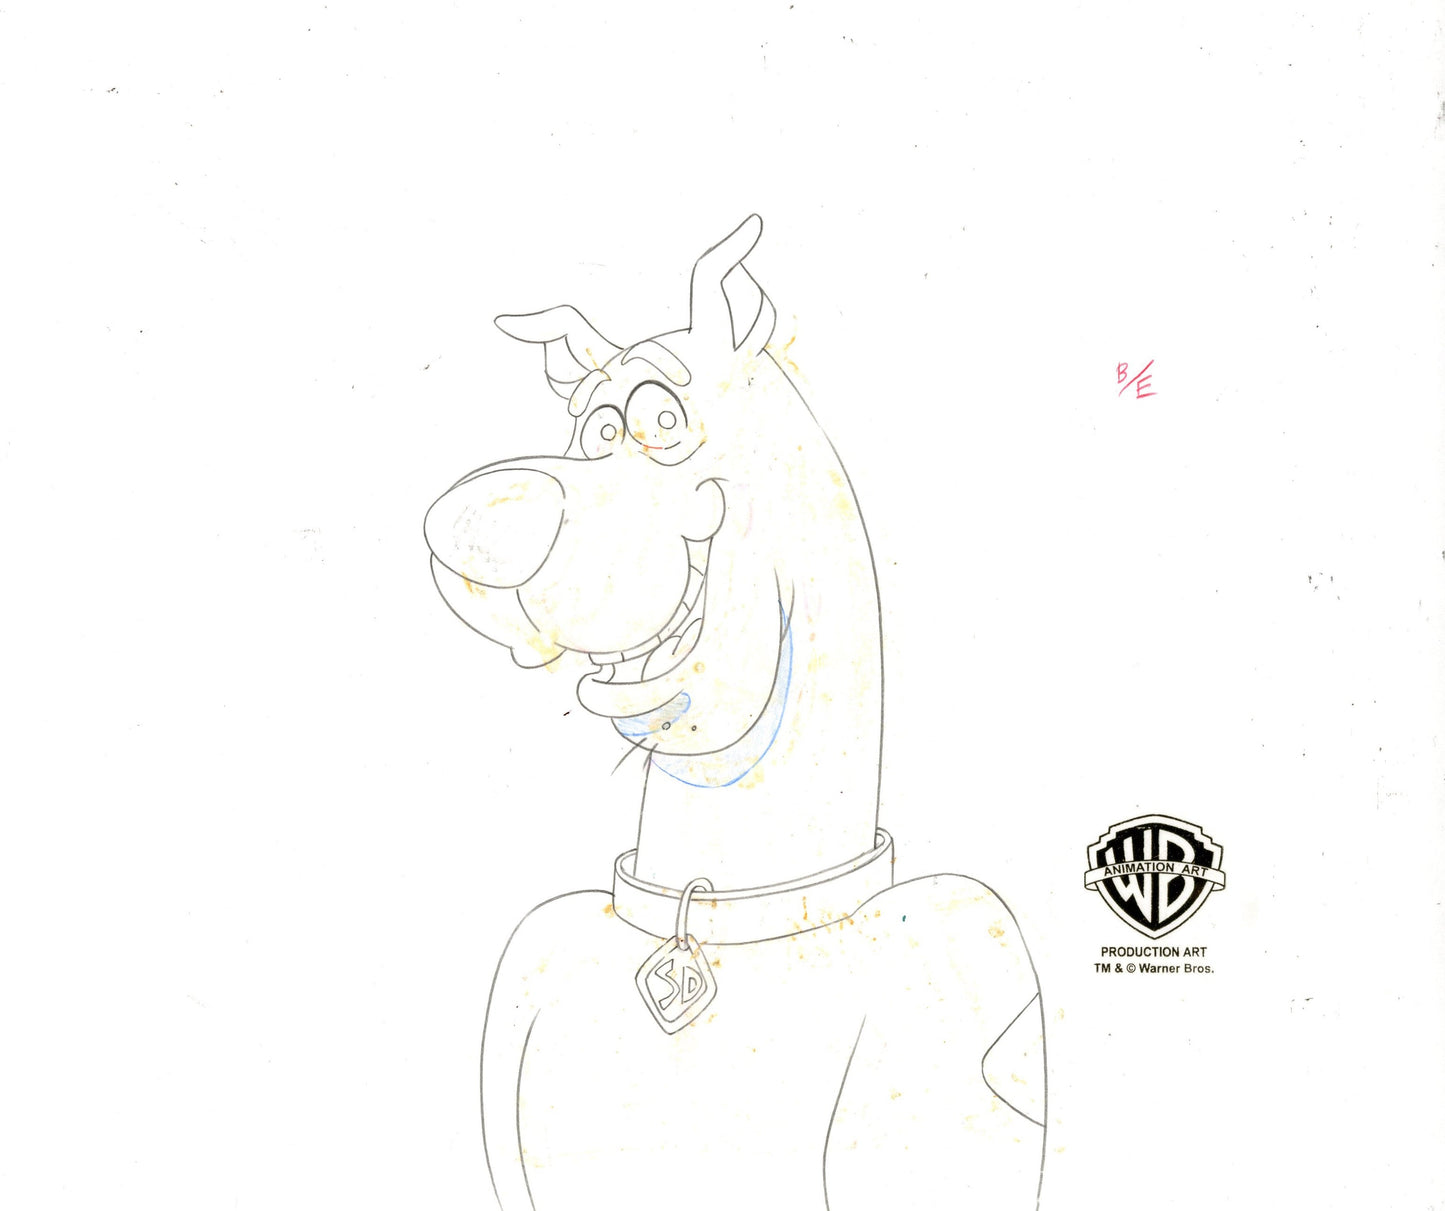 Scooby Doo Zombie Island Original Production Cel and Drawing Signed by Bob Singer: Scooby